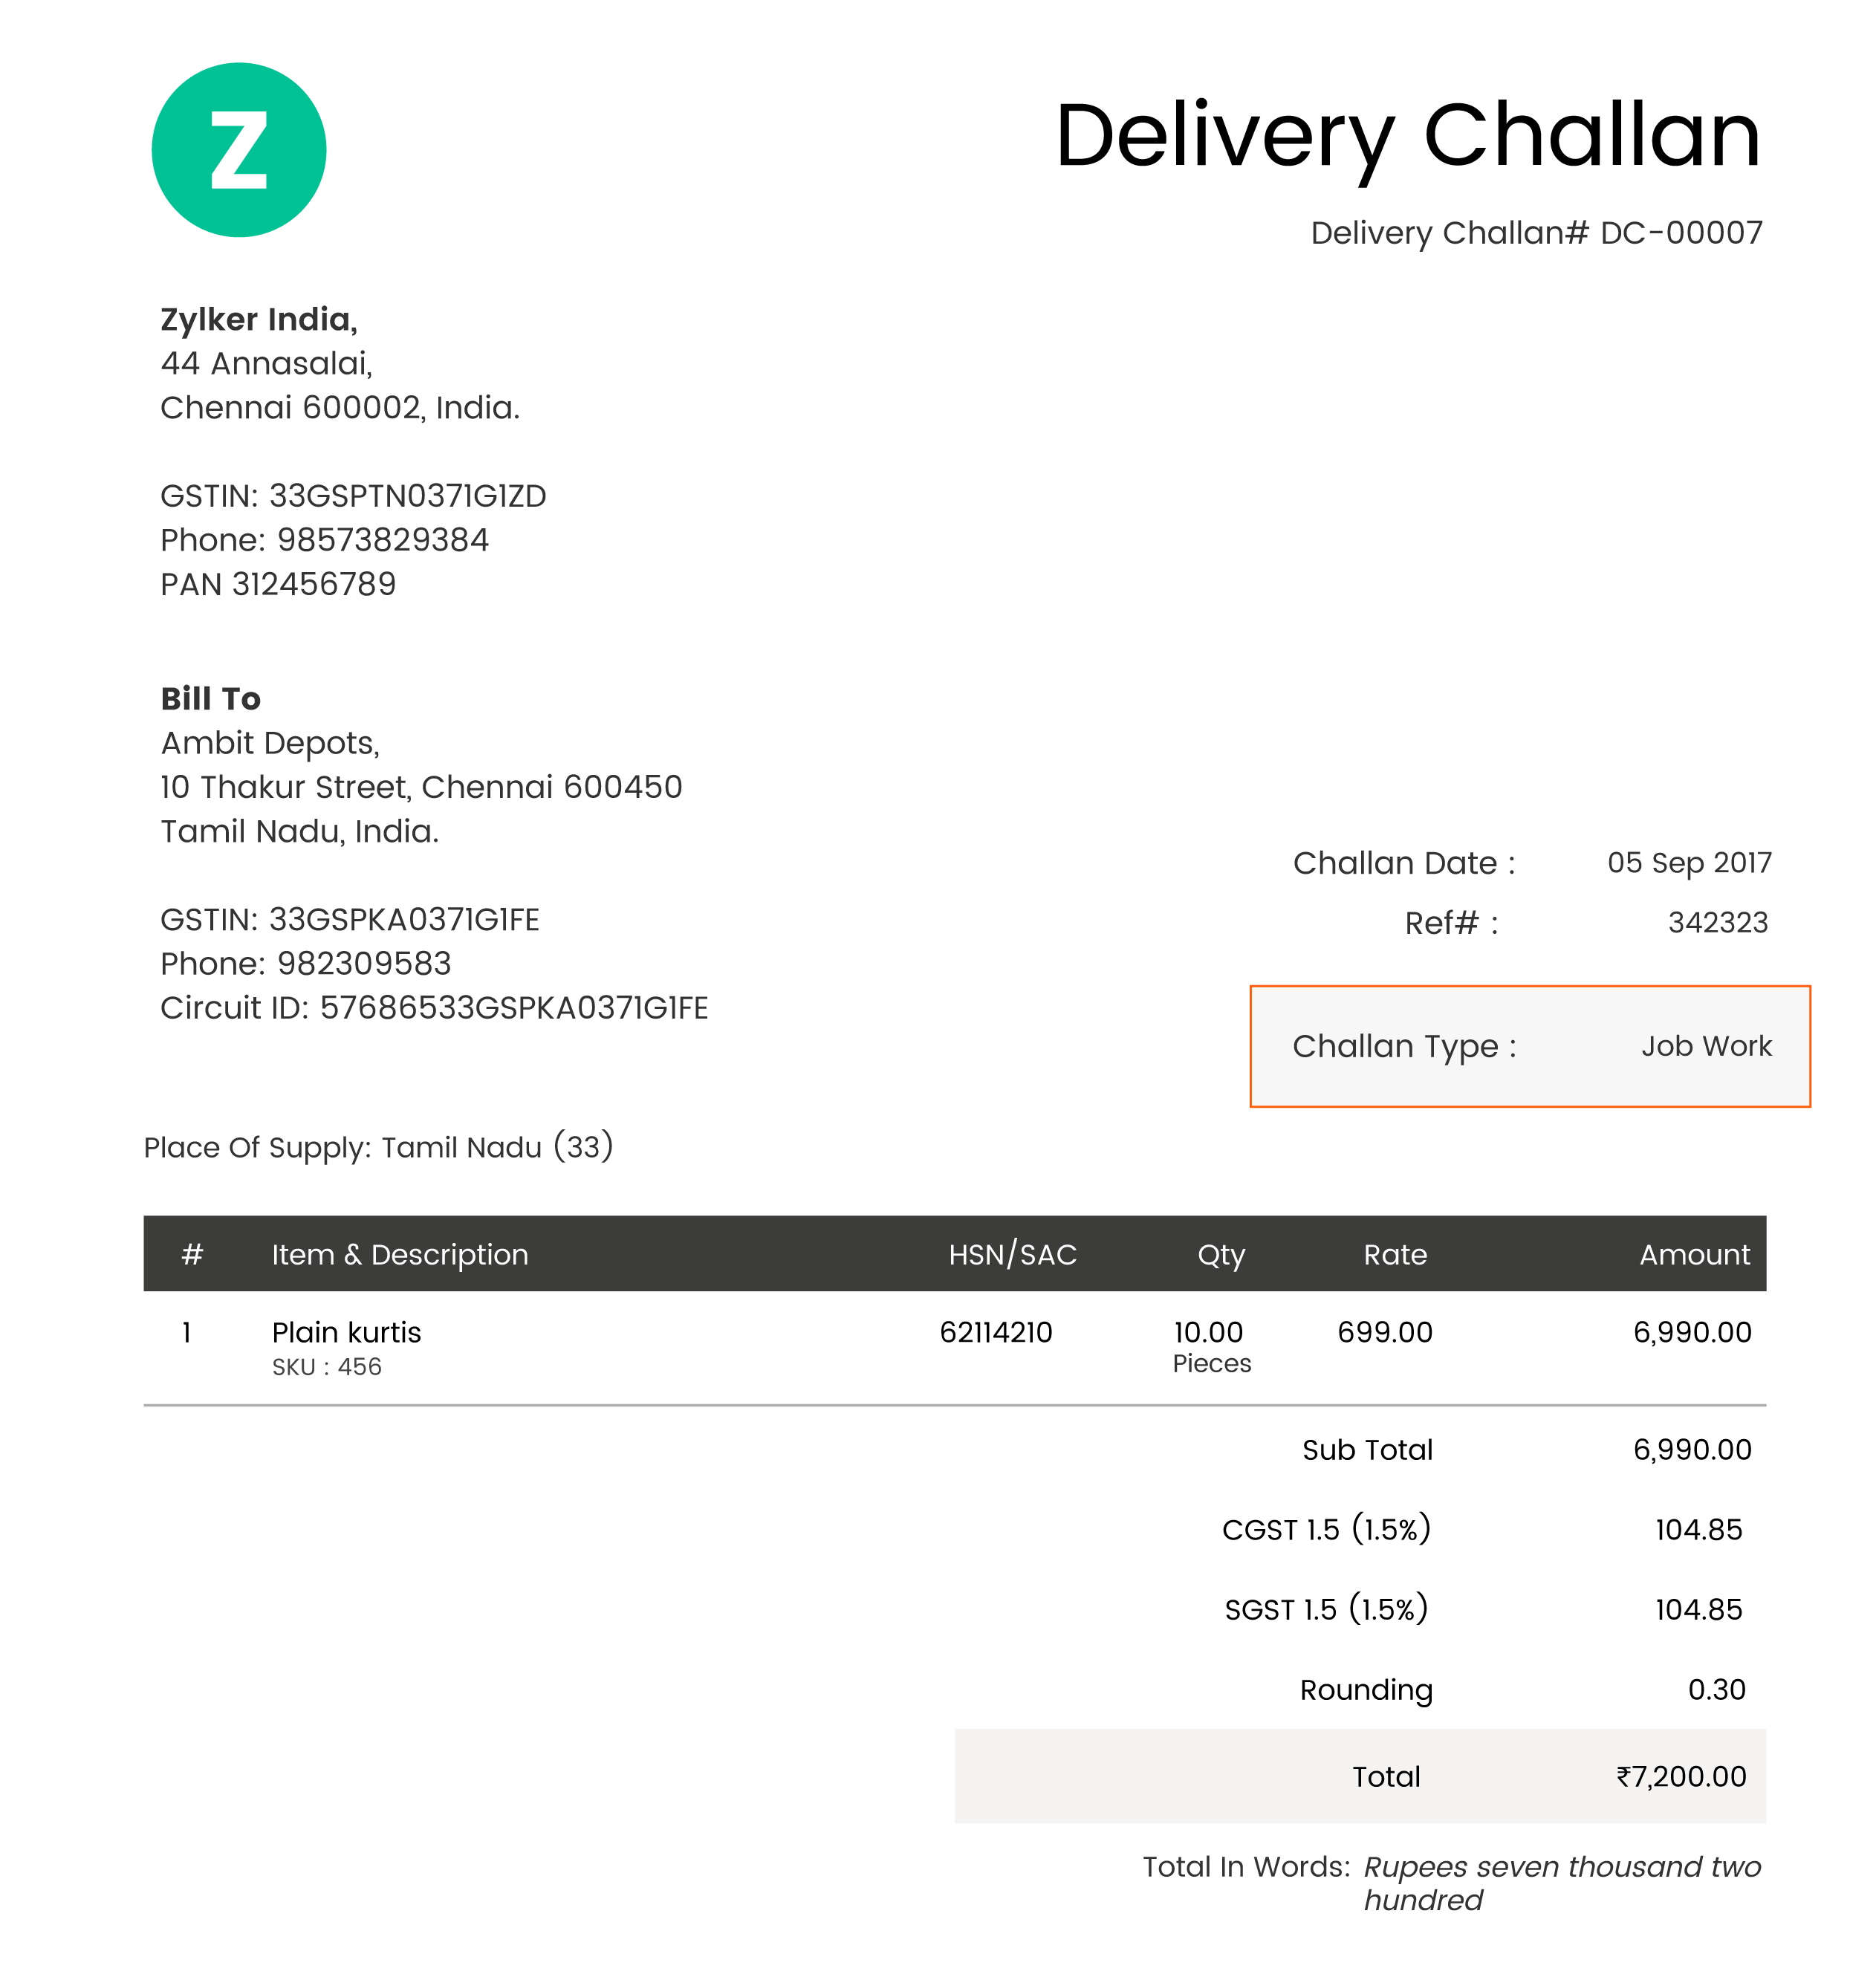 Delivery Challan